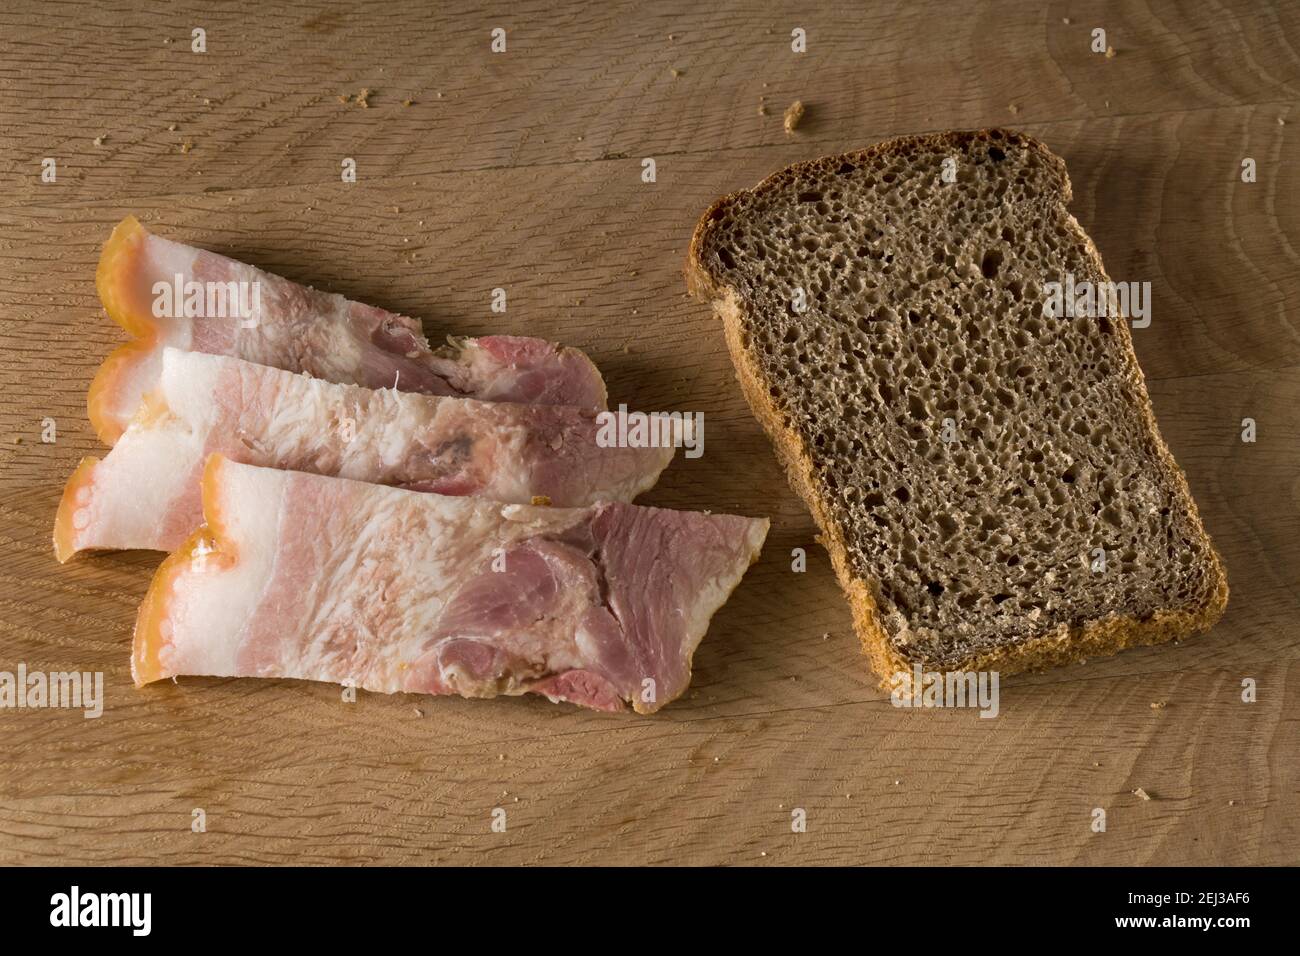 Black bread and salted lard with strips of meat, on a wooden board Stock Photo